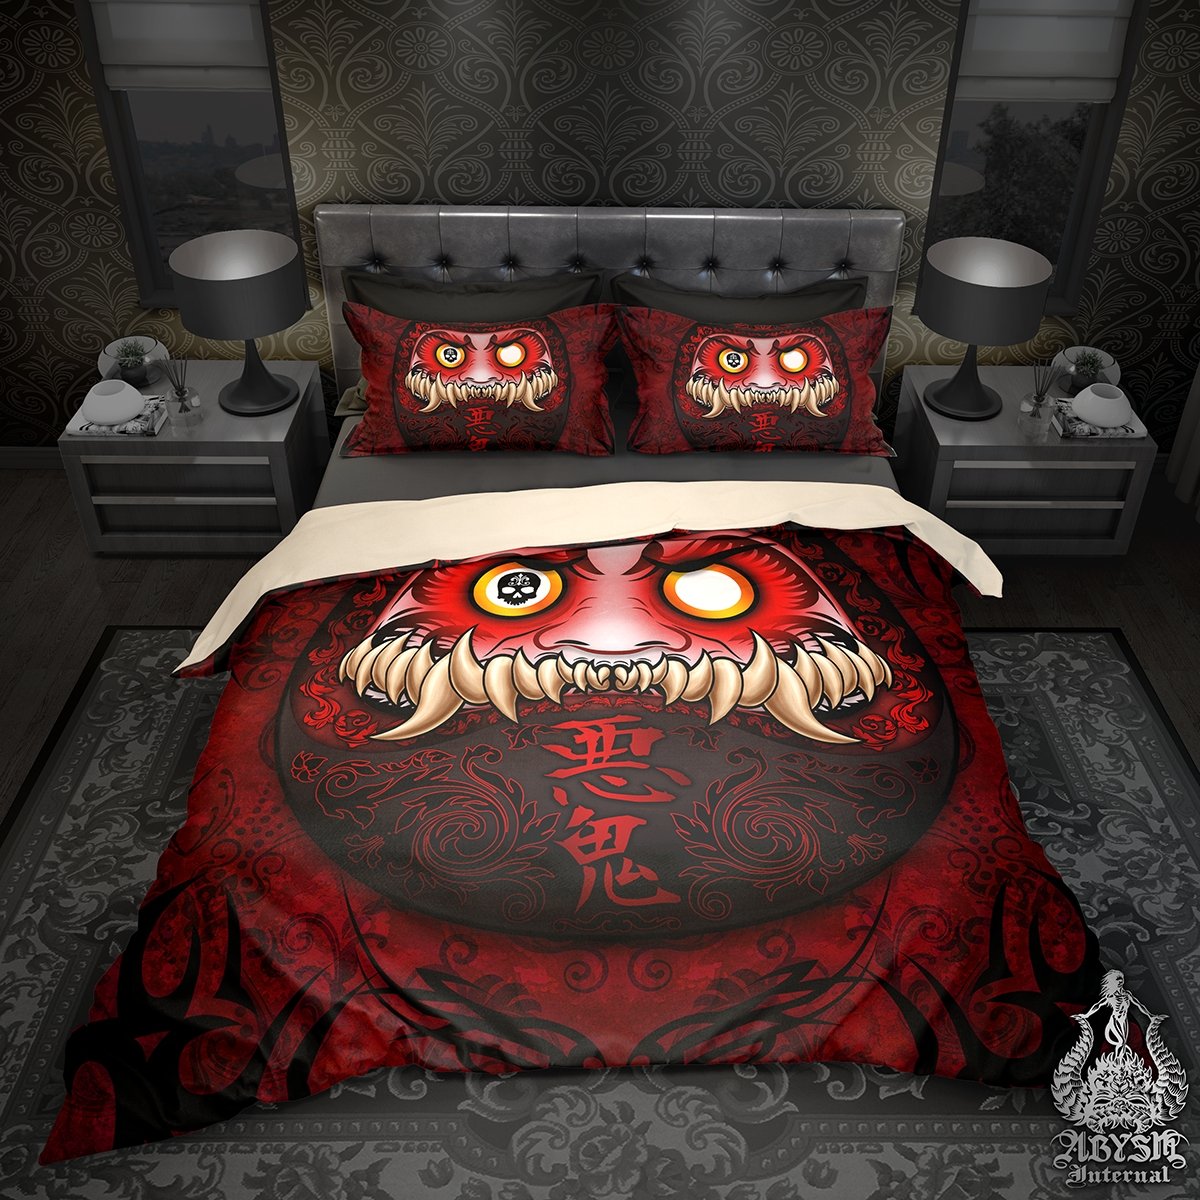 Monster Daruma Bedding Set, Comforter and Duvet, Gothic Bed Cover and Bedroom Decor, Alternative Room, King, Queen and Twin Size - Funny Demon - Abysm Internal